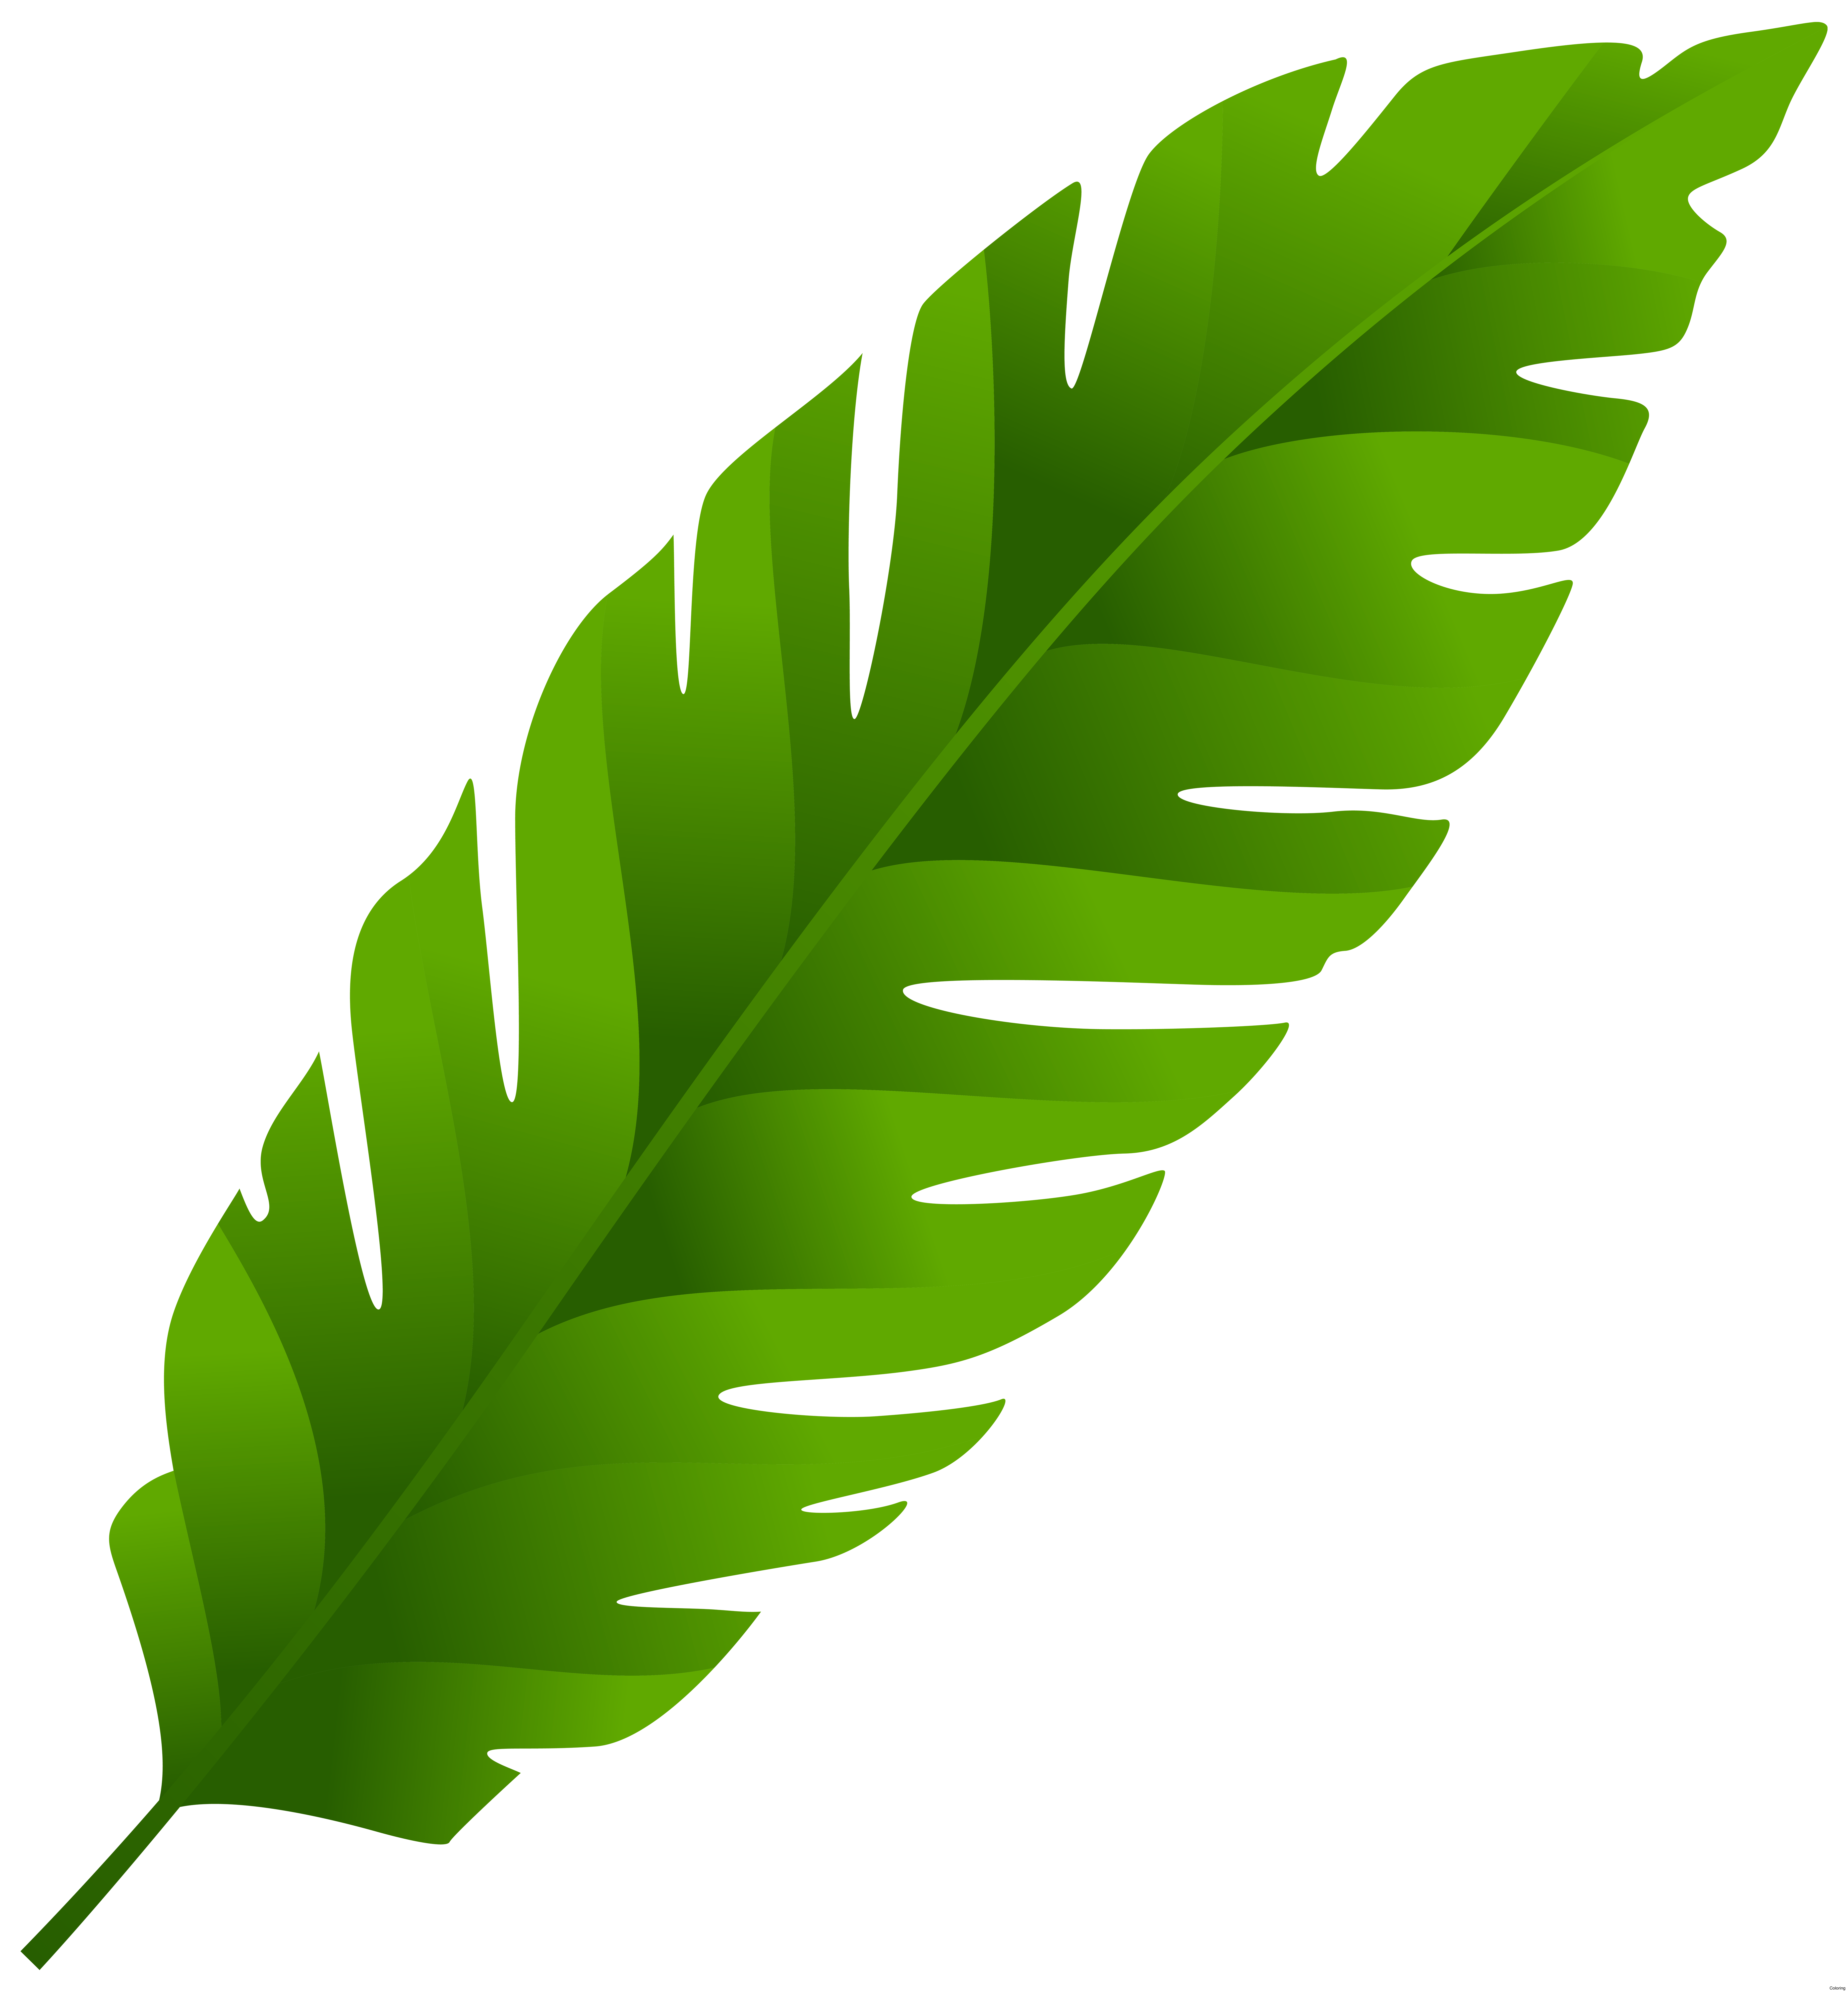 Printable Palm Leaf - paper palm leaf template - Matah - Cut out the